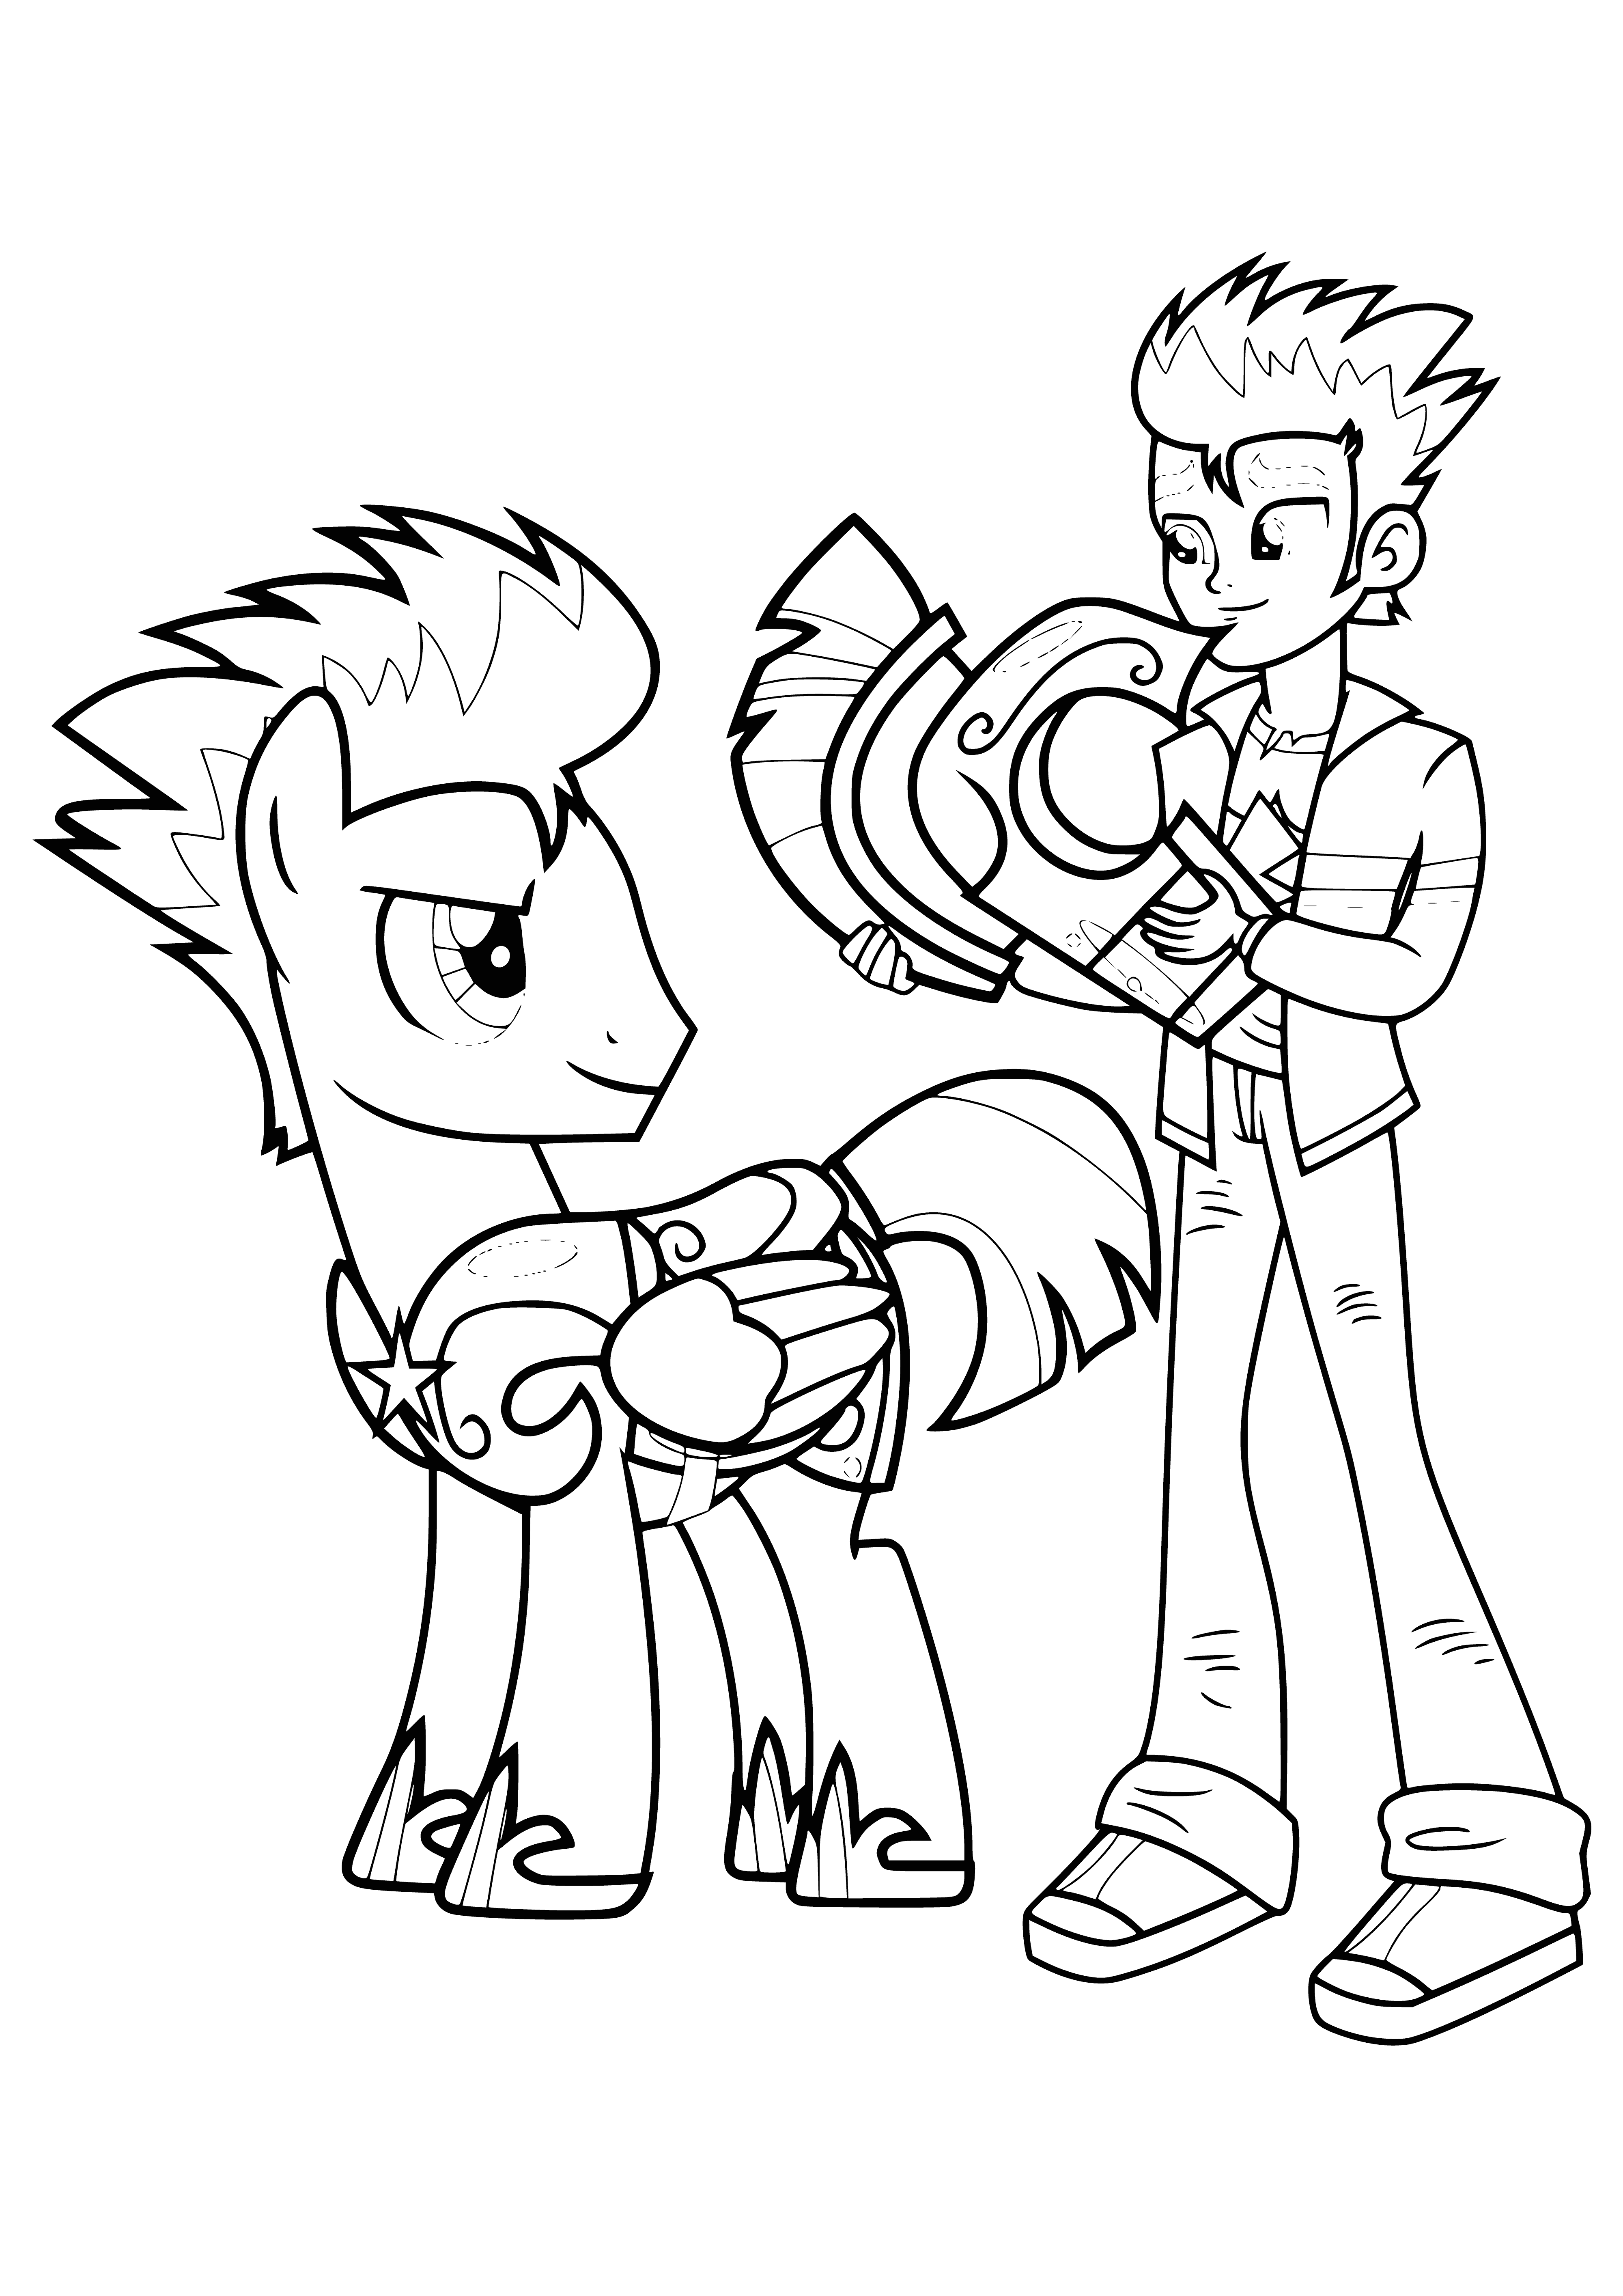 coloring page: Flash Sentry & her Pony counterpart: girl w/ pink hair & crown, boy w/ yellow hair; both blue eyes.